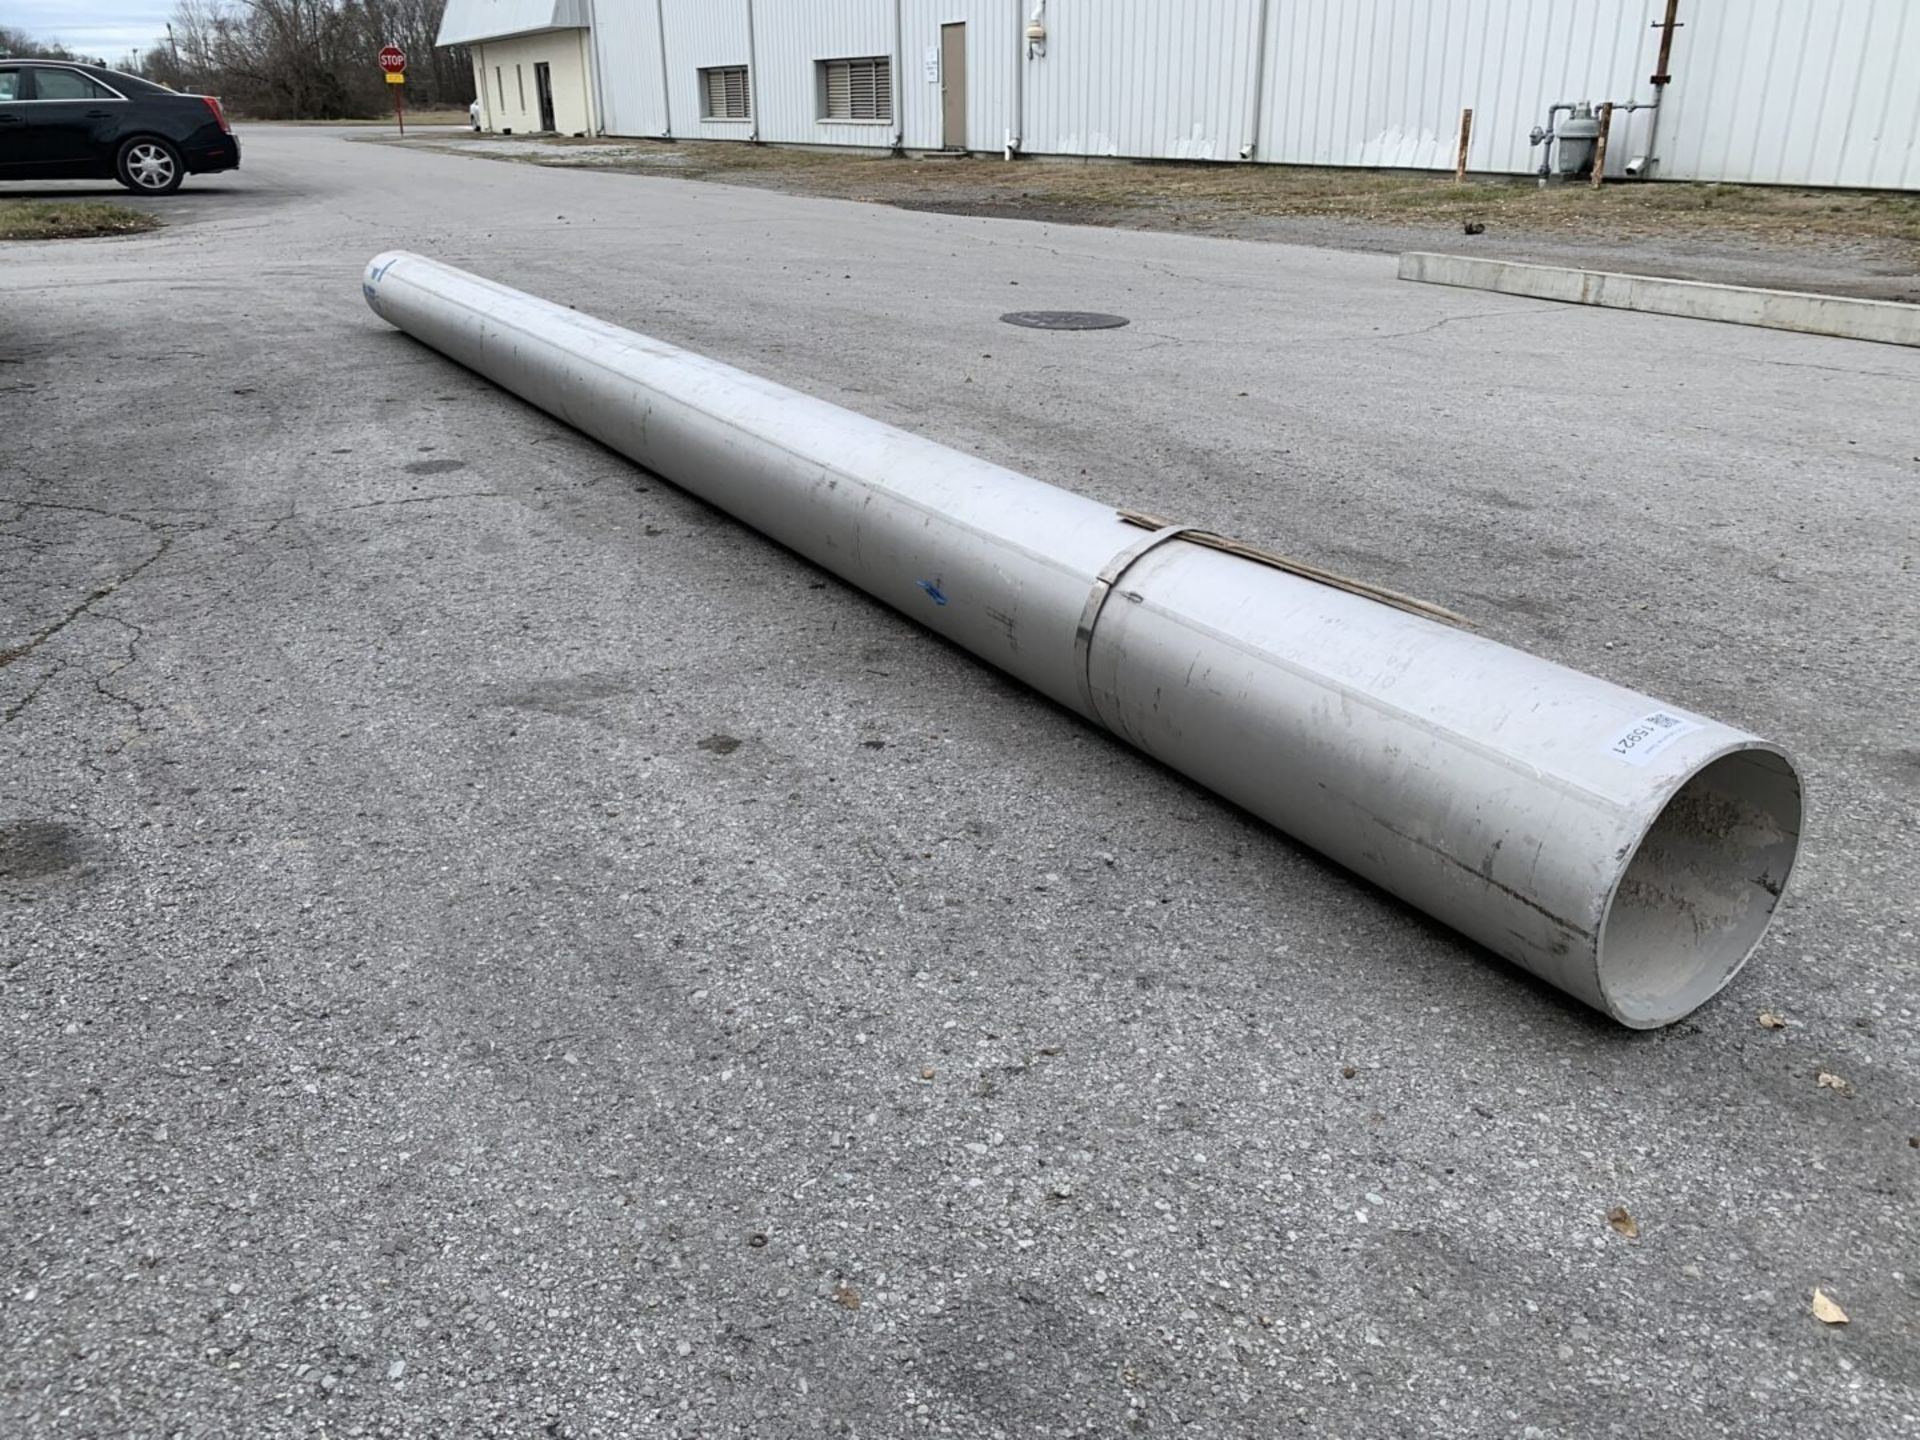 Stainless Steel Pipe 12.5" x 12.5" x 250" L